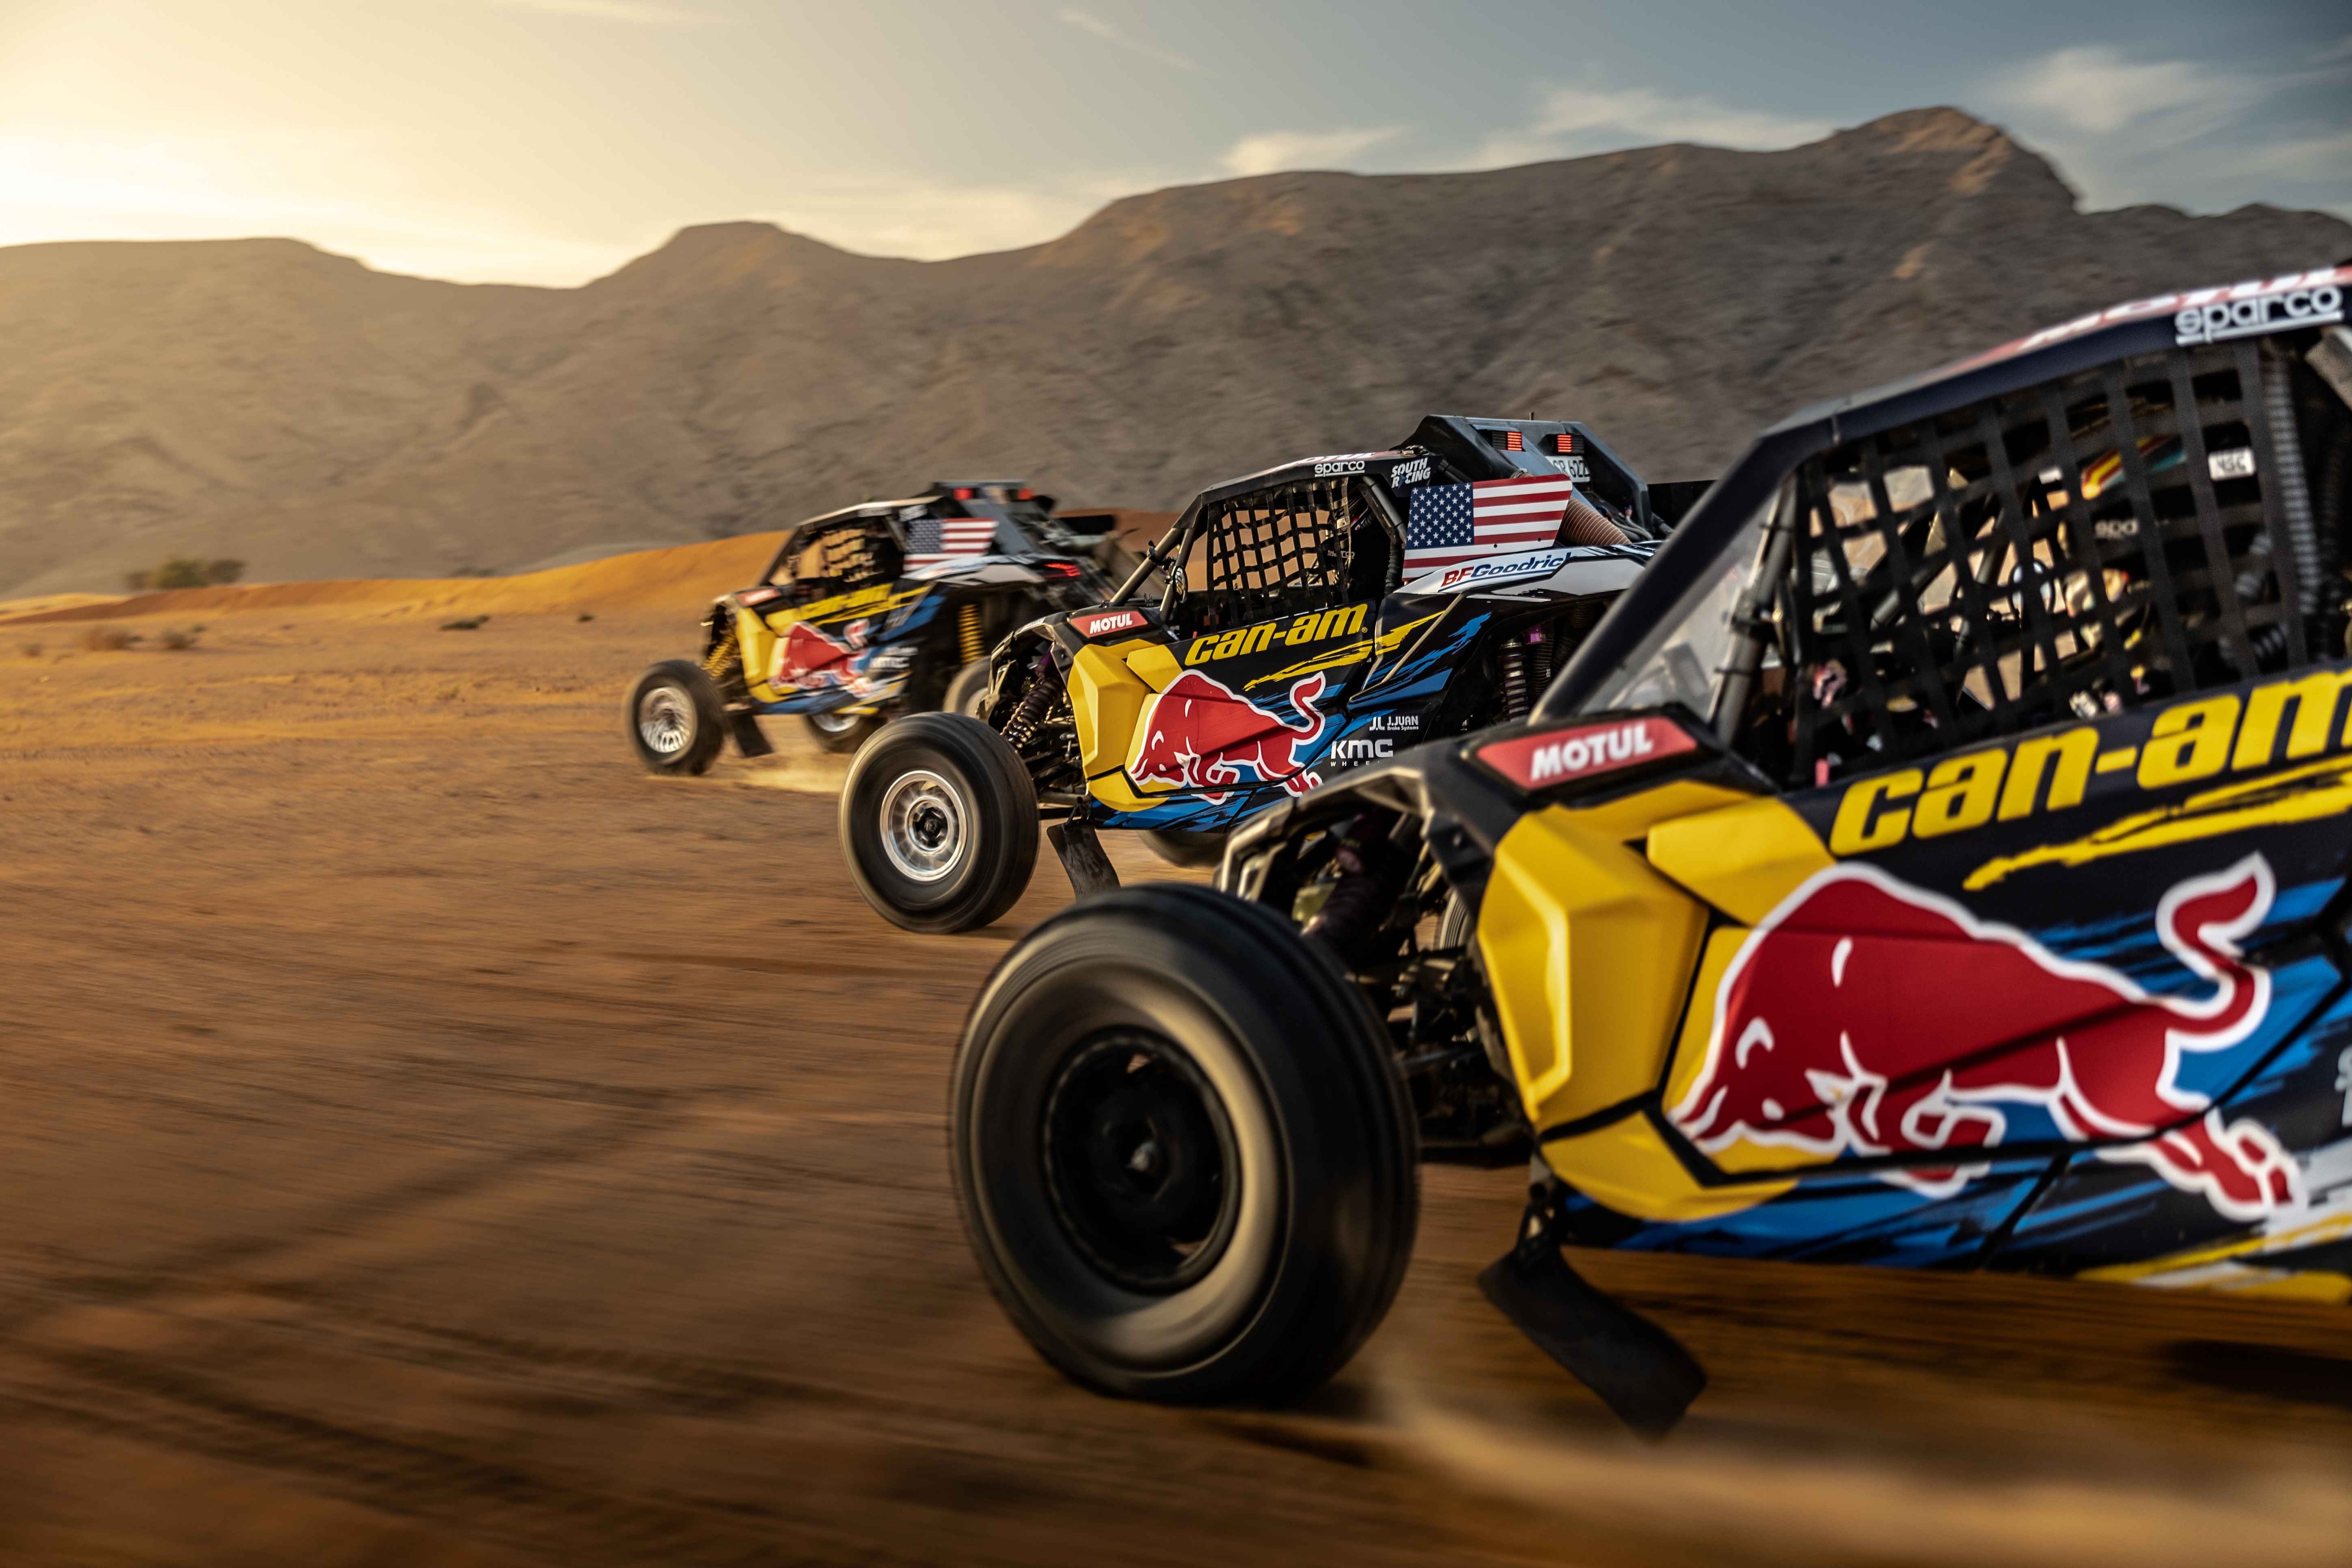 Three Red-Bull brand Can-Am Side-by-side vehicle racing at full speed